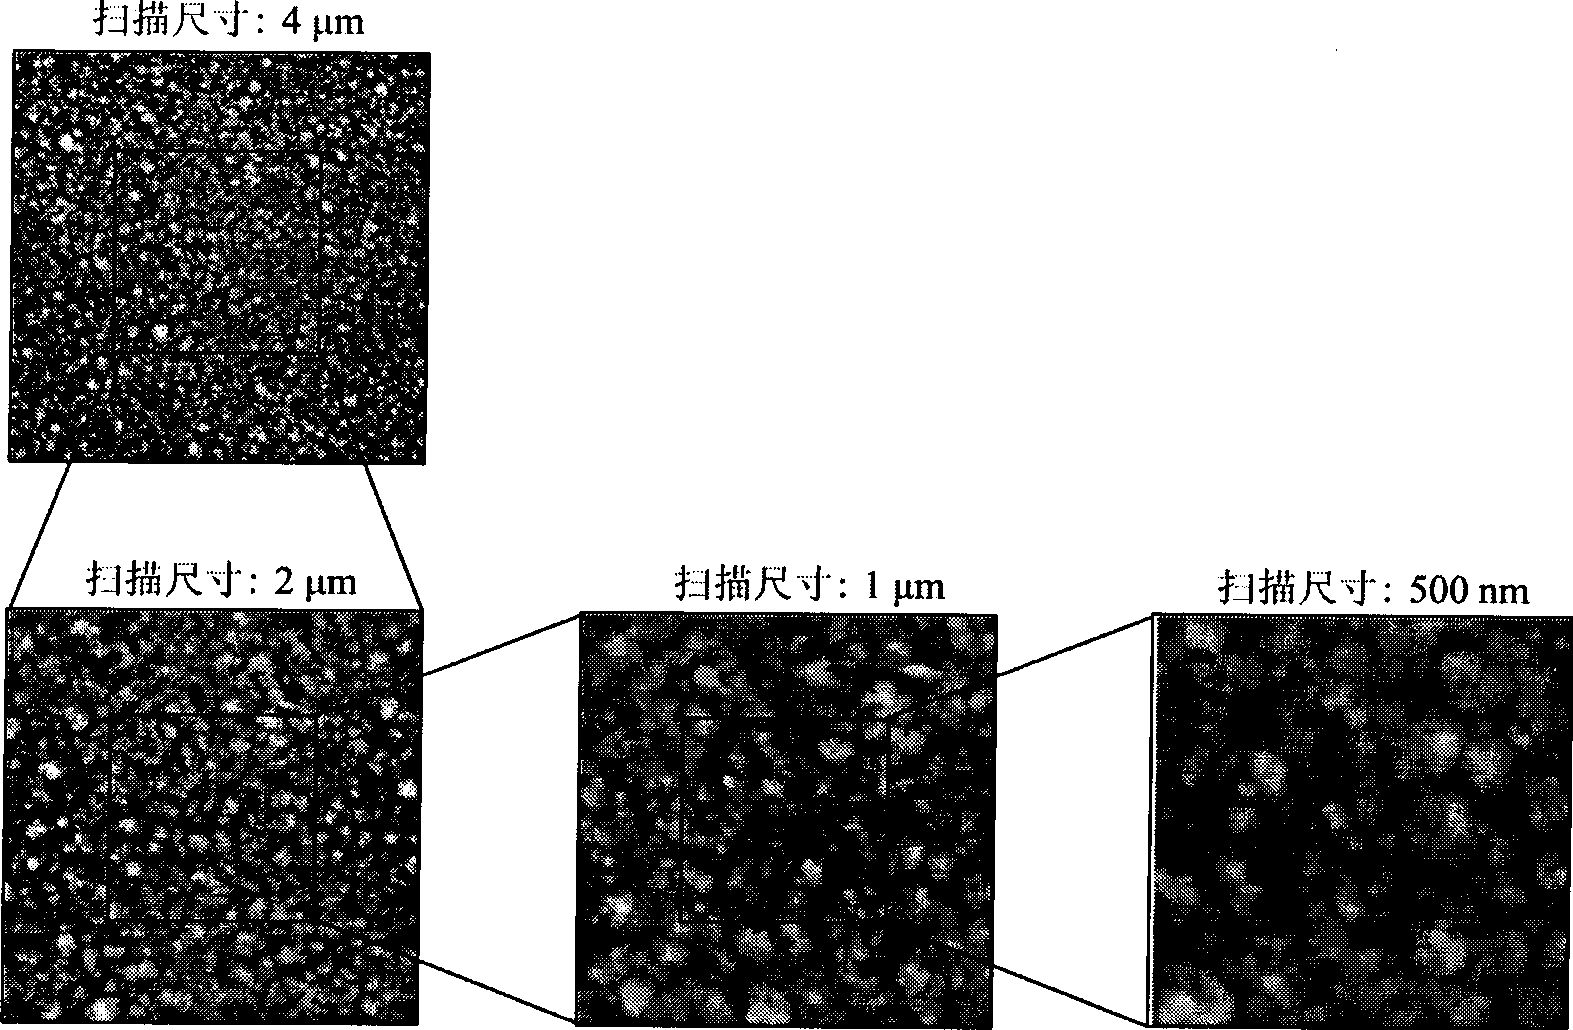 Method for quantizing characterization of thin film surface topography based on multi-dimension system theory